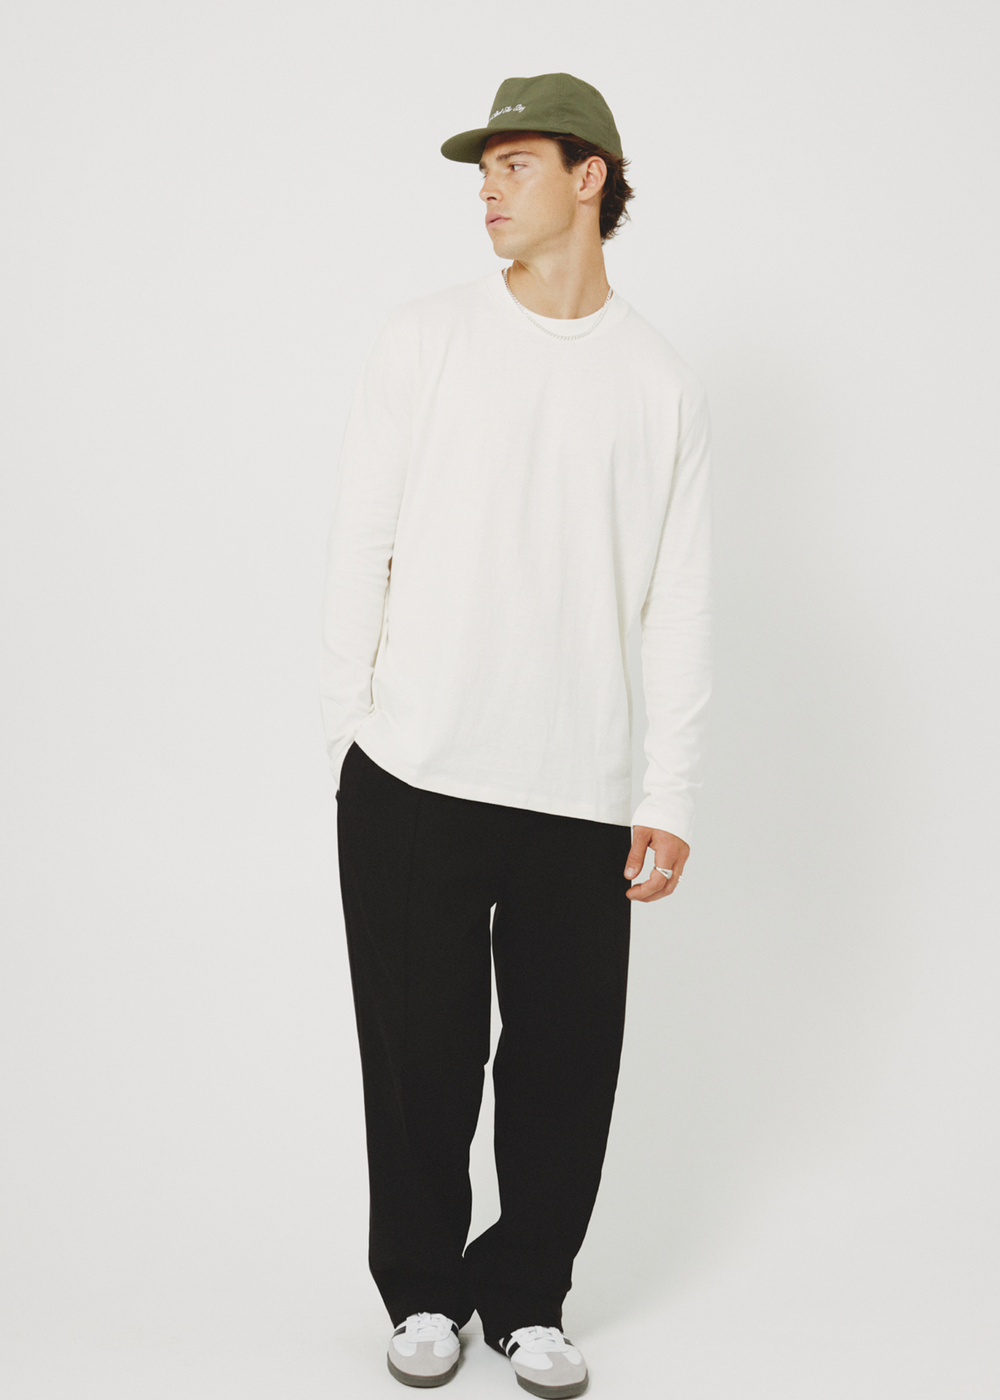 HEMP JERSEY LS / RICE WHITE | COMMONERS | Mad About The Boy